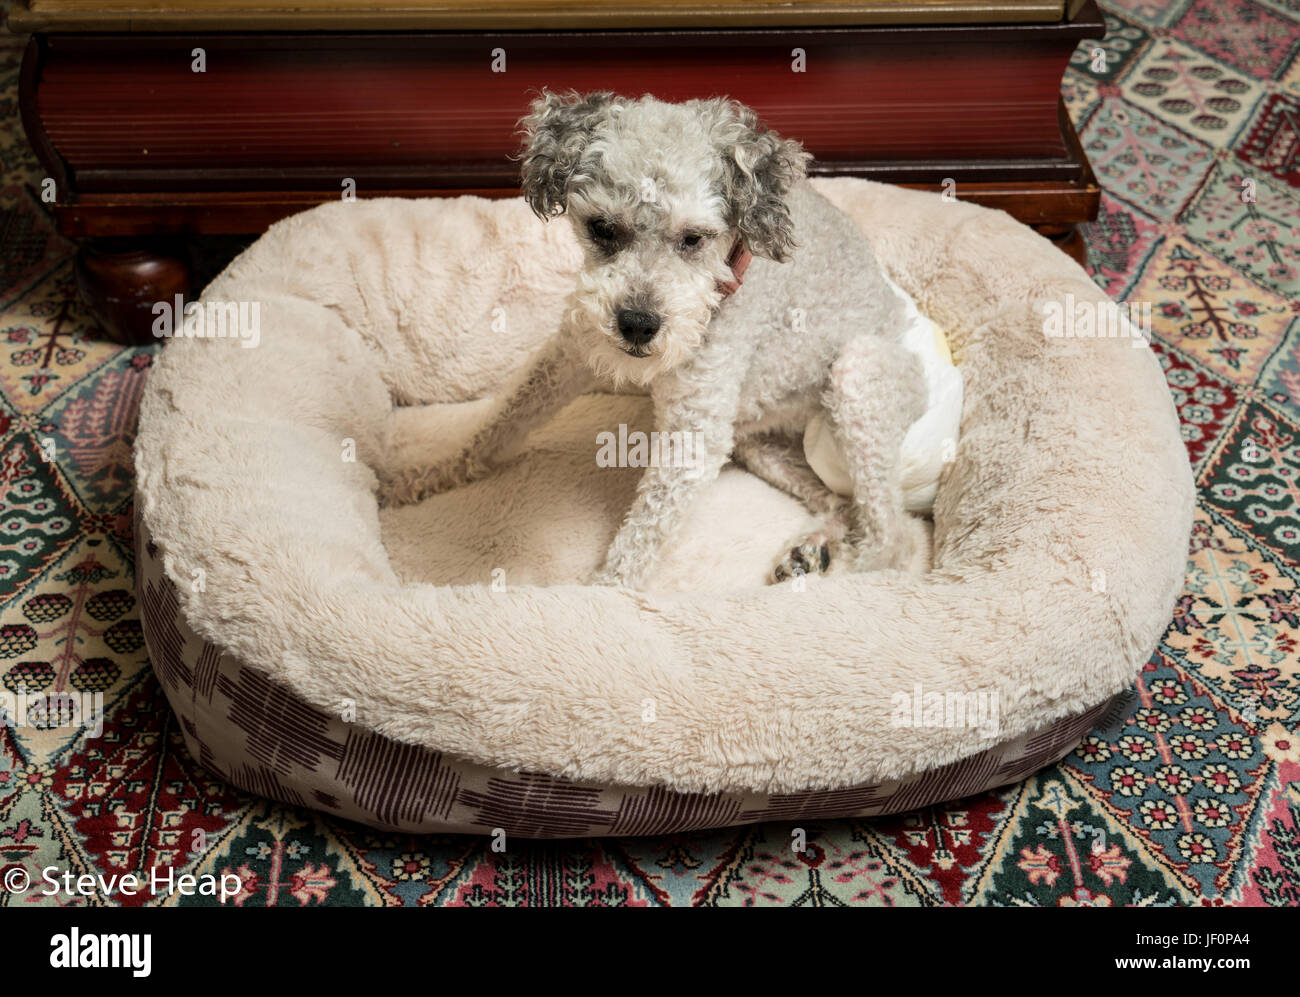 Old grey dog wearing a doggy diaper Stock Photo